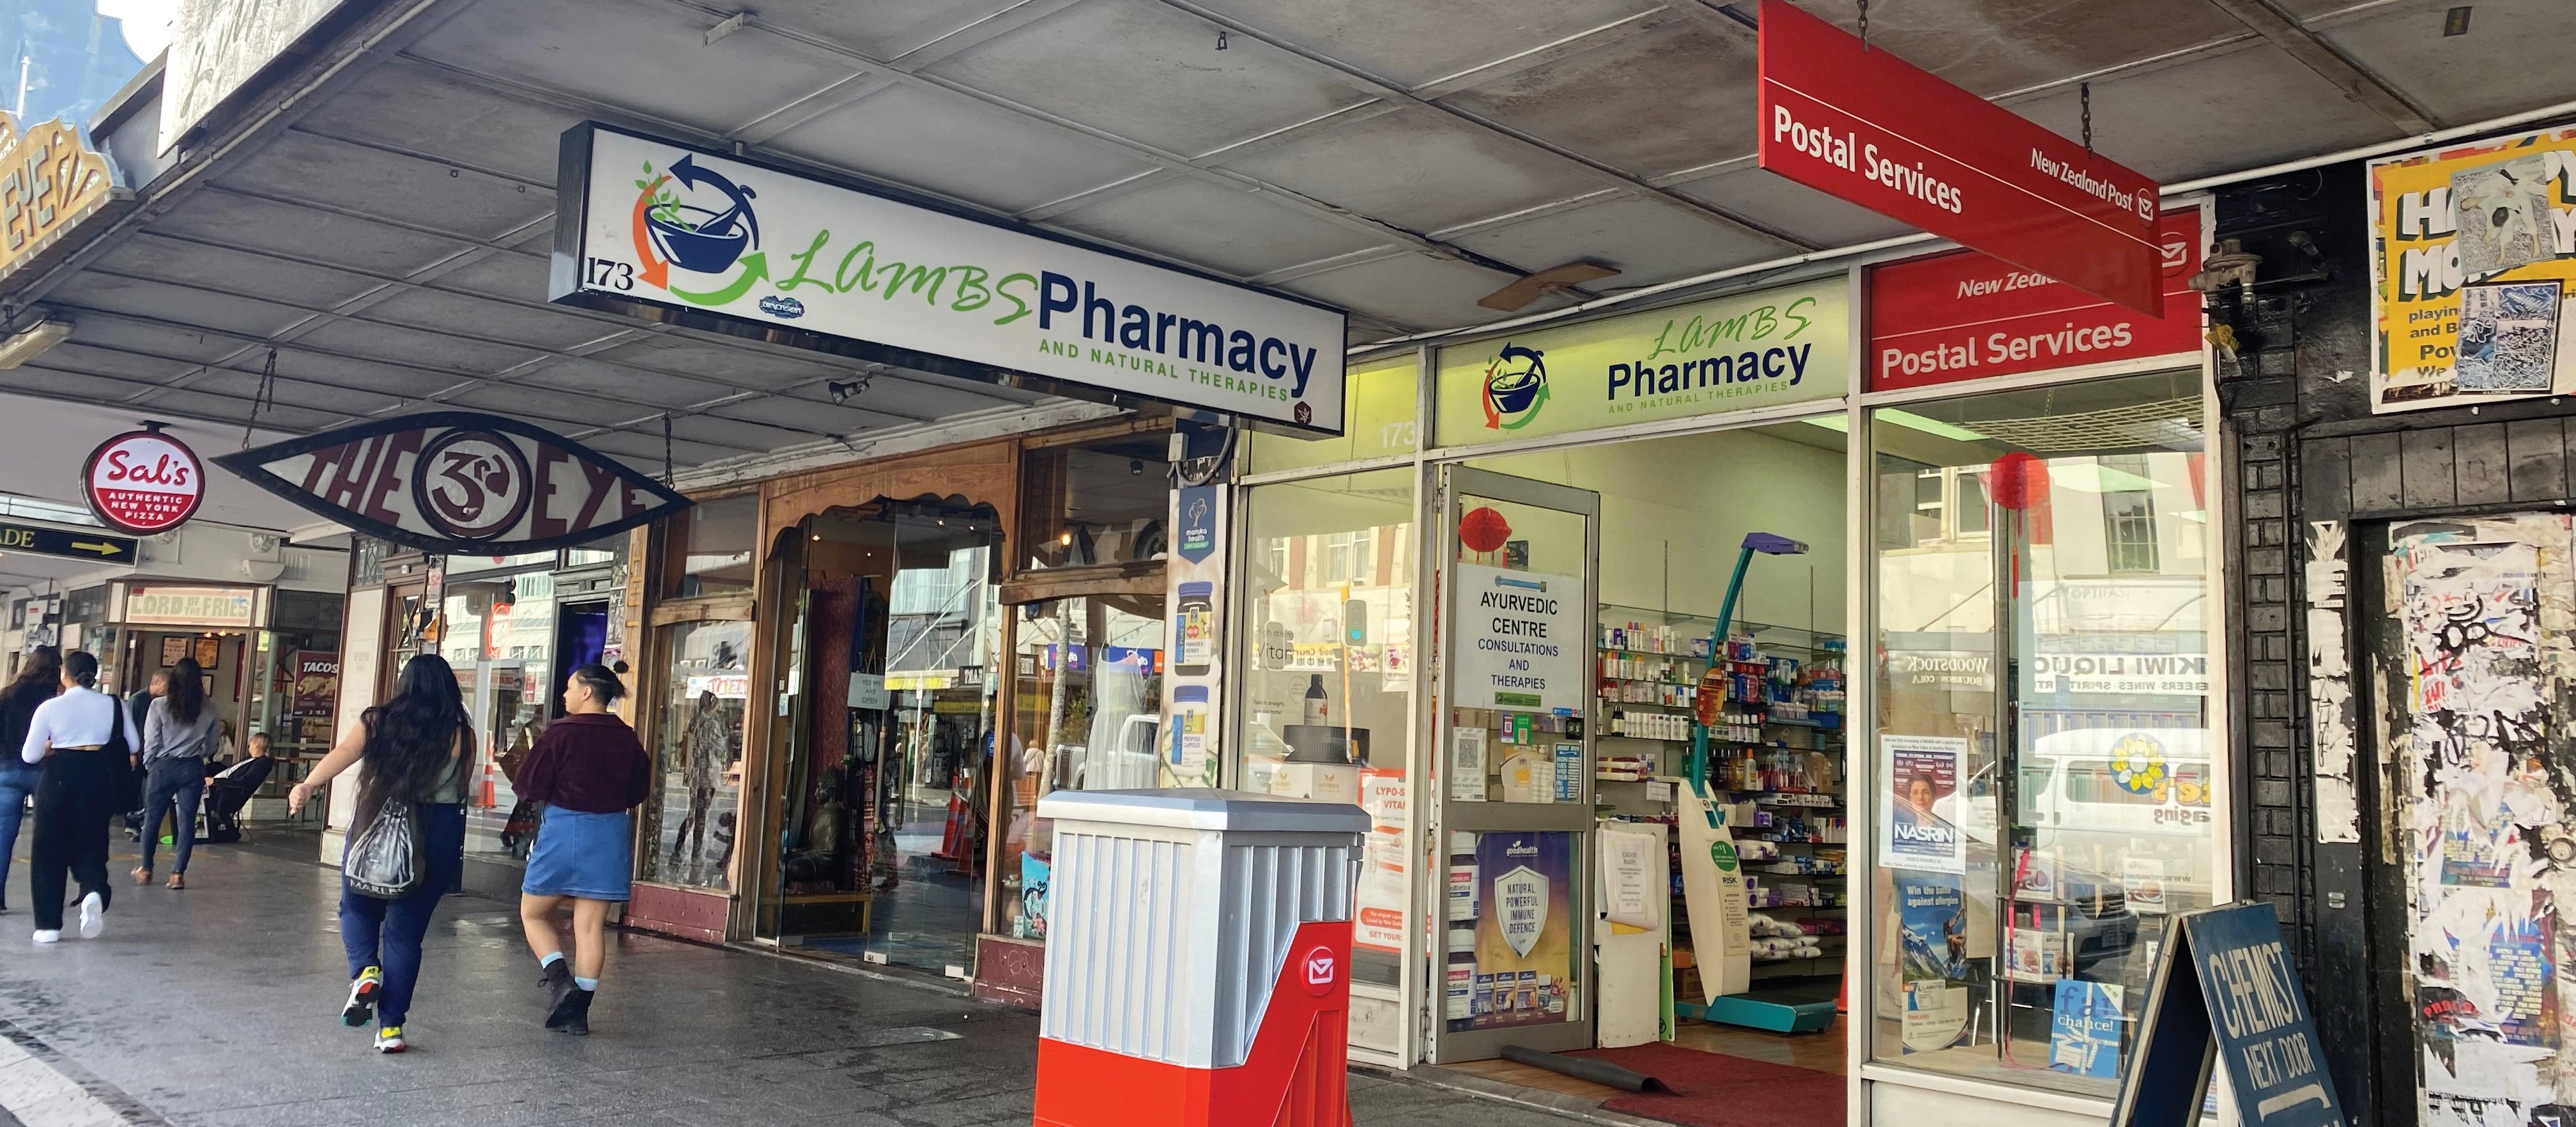 Lambs Pharmacy and Natural Therapies Centre